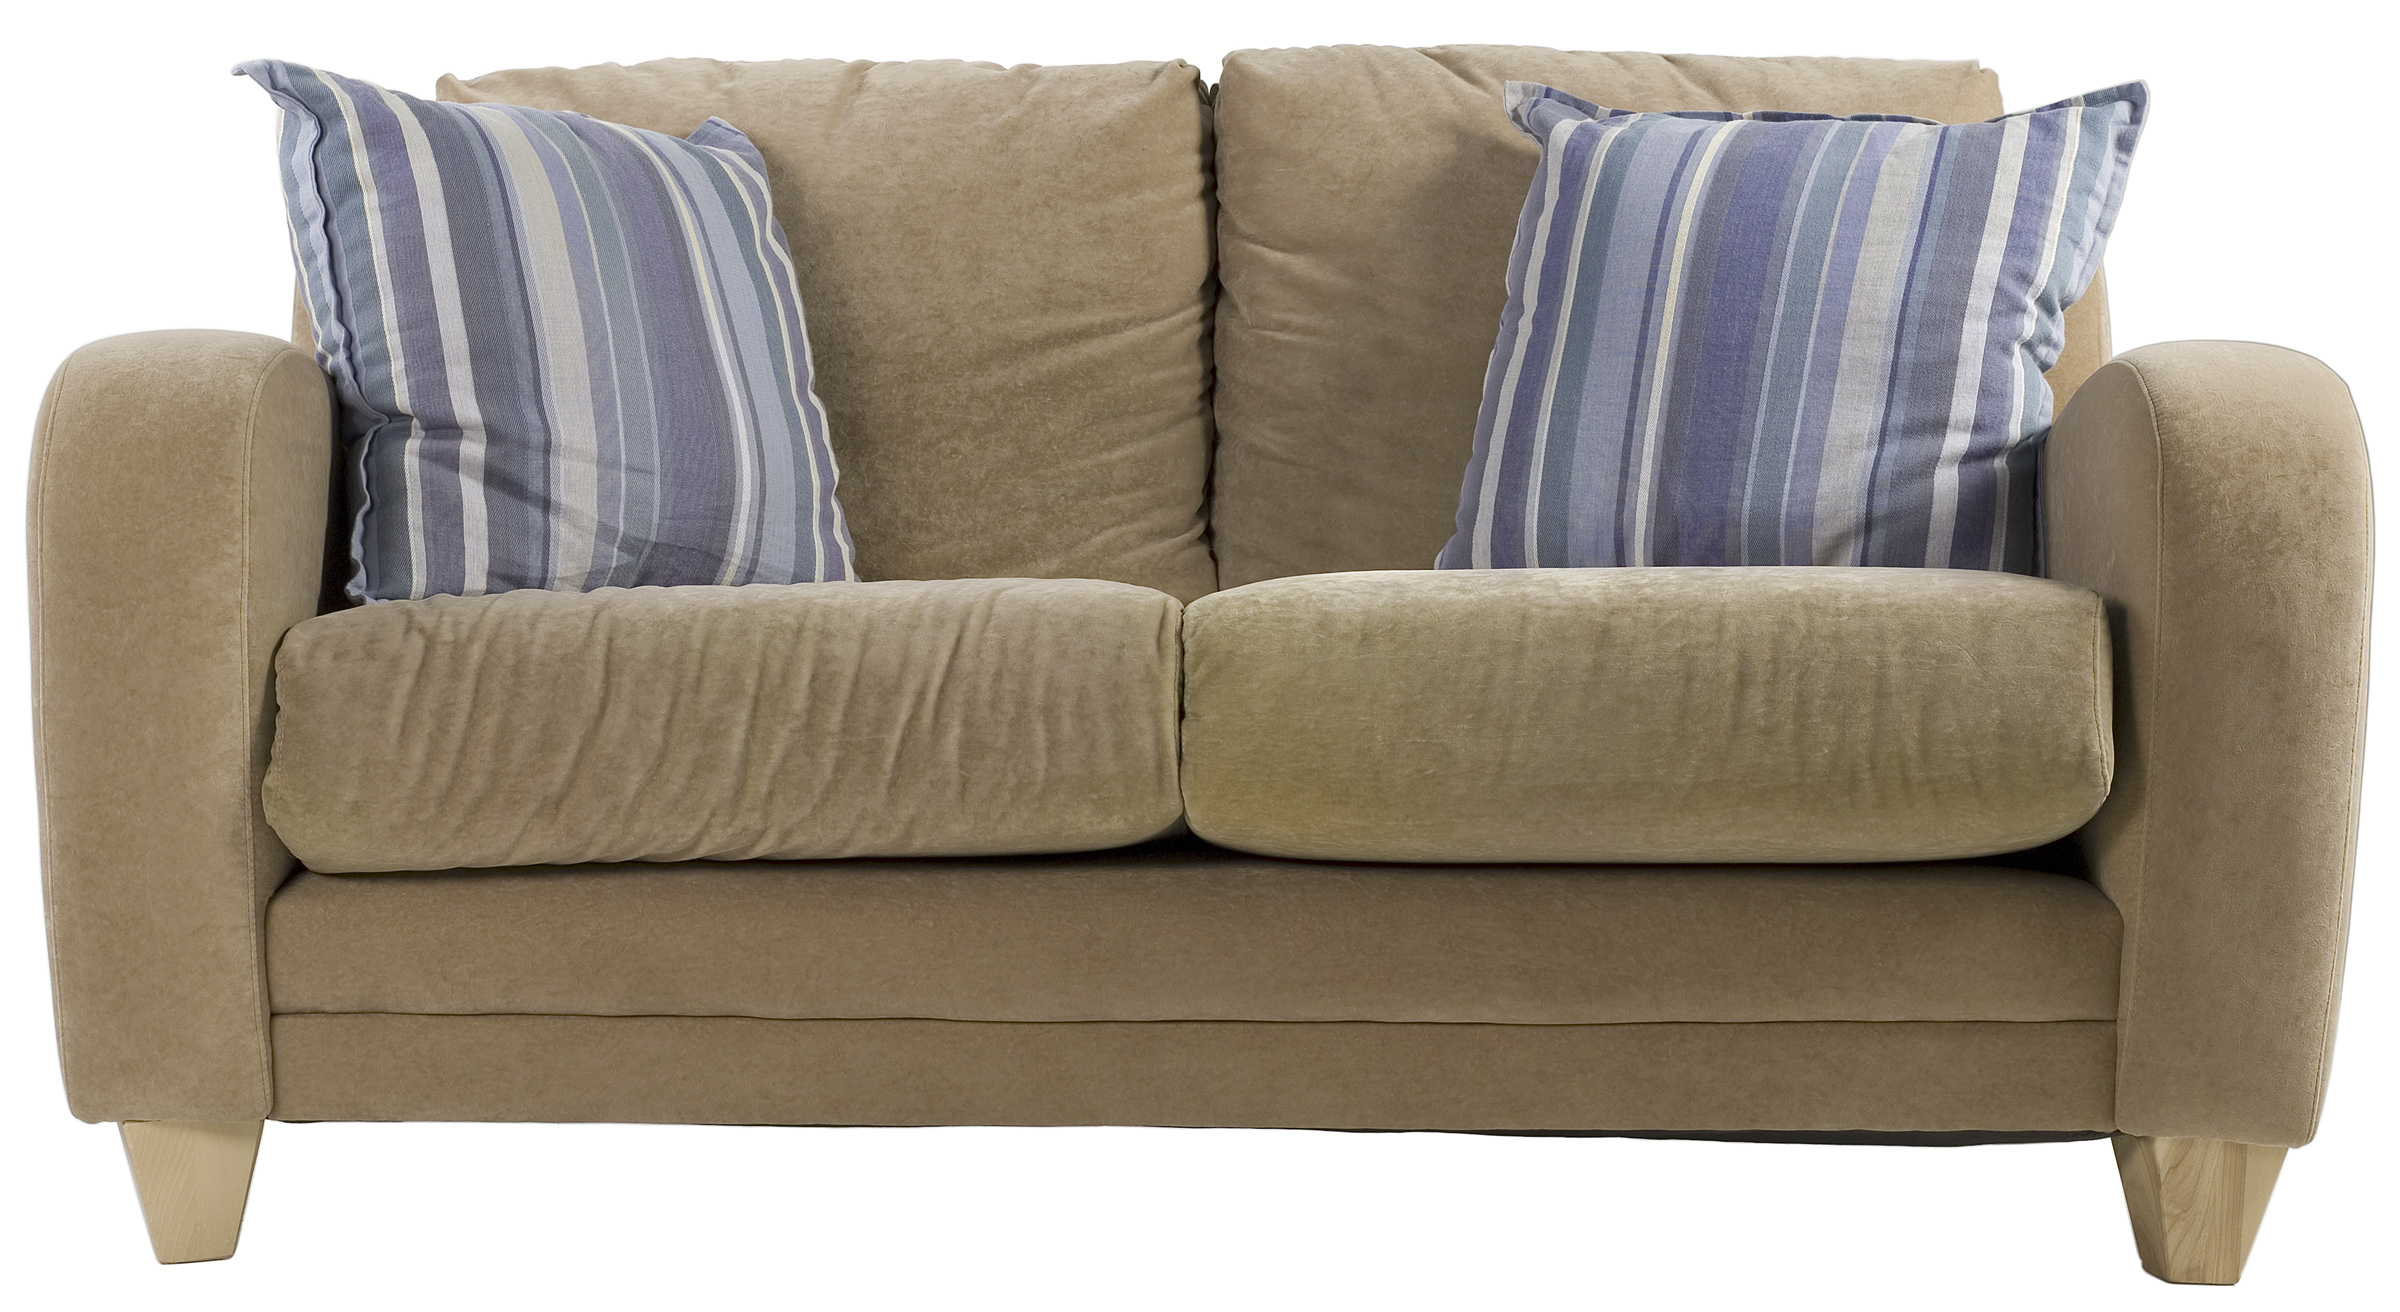 How to Replace the Foam Inside Your Sofa Cushions